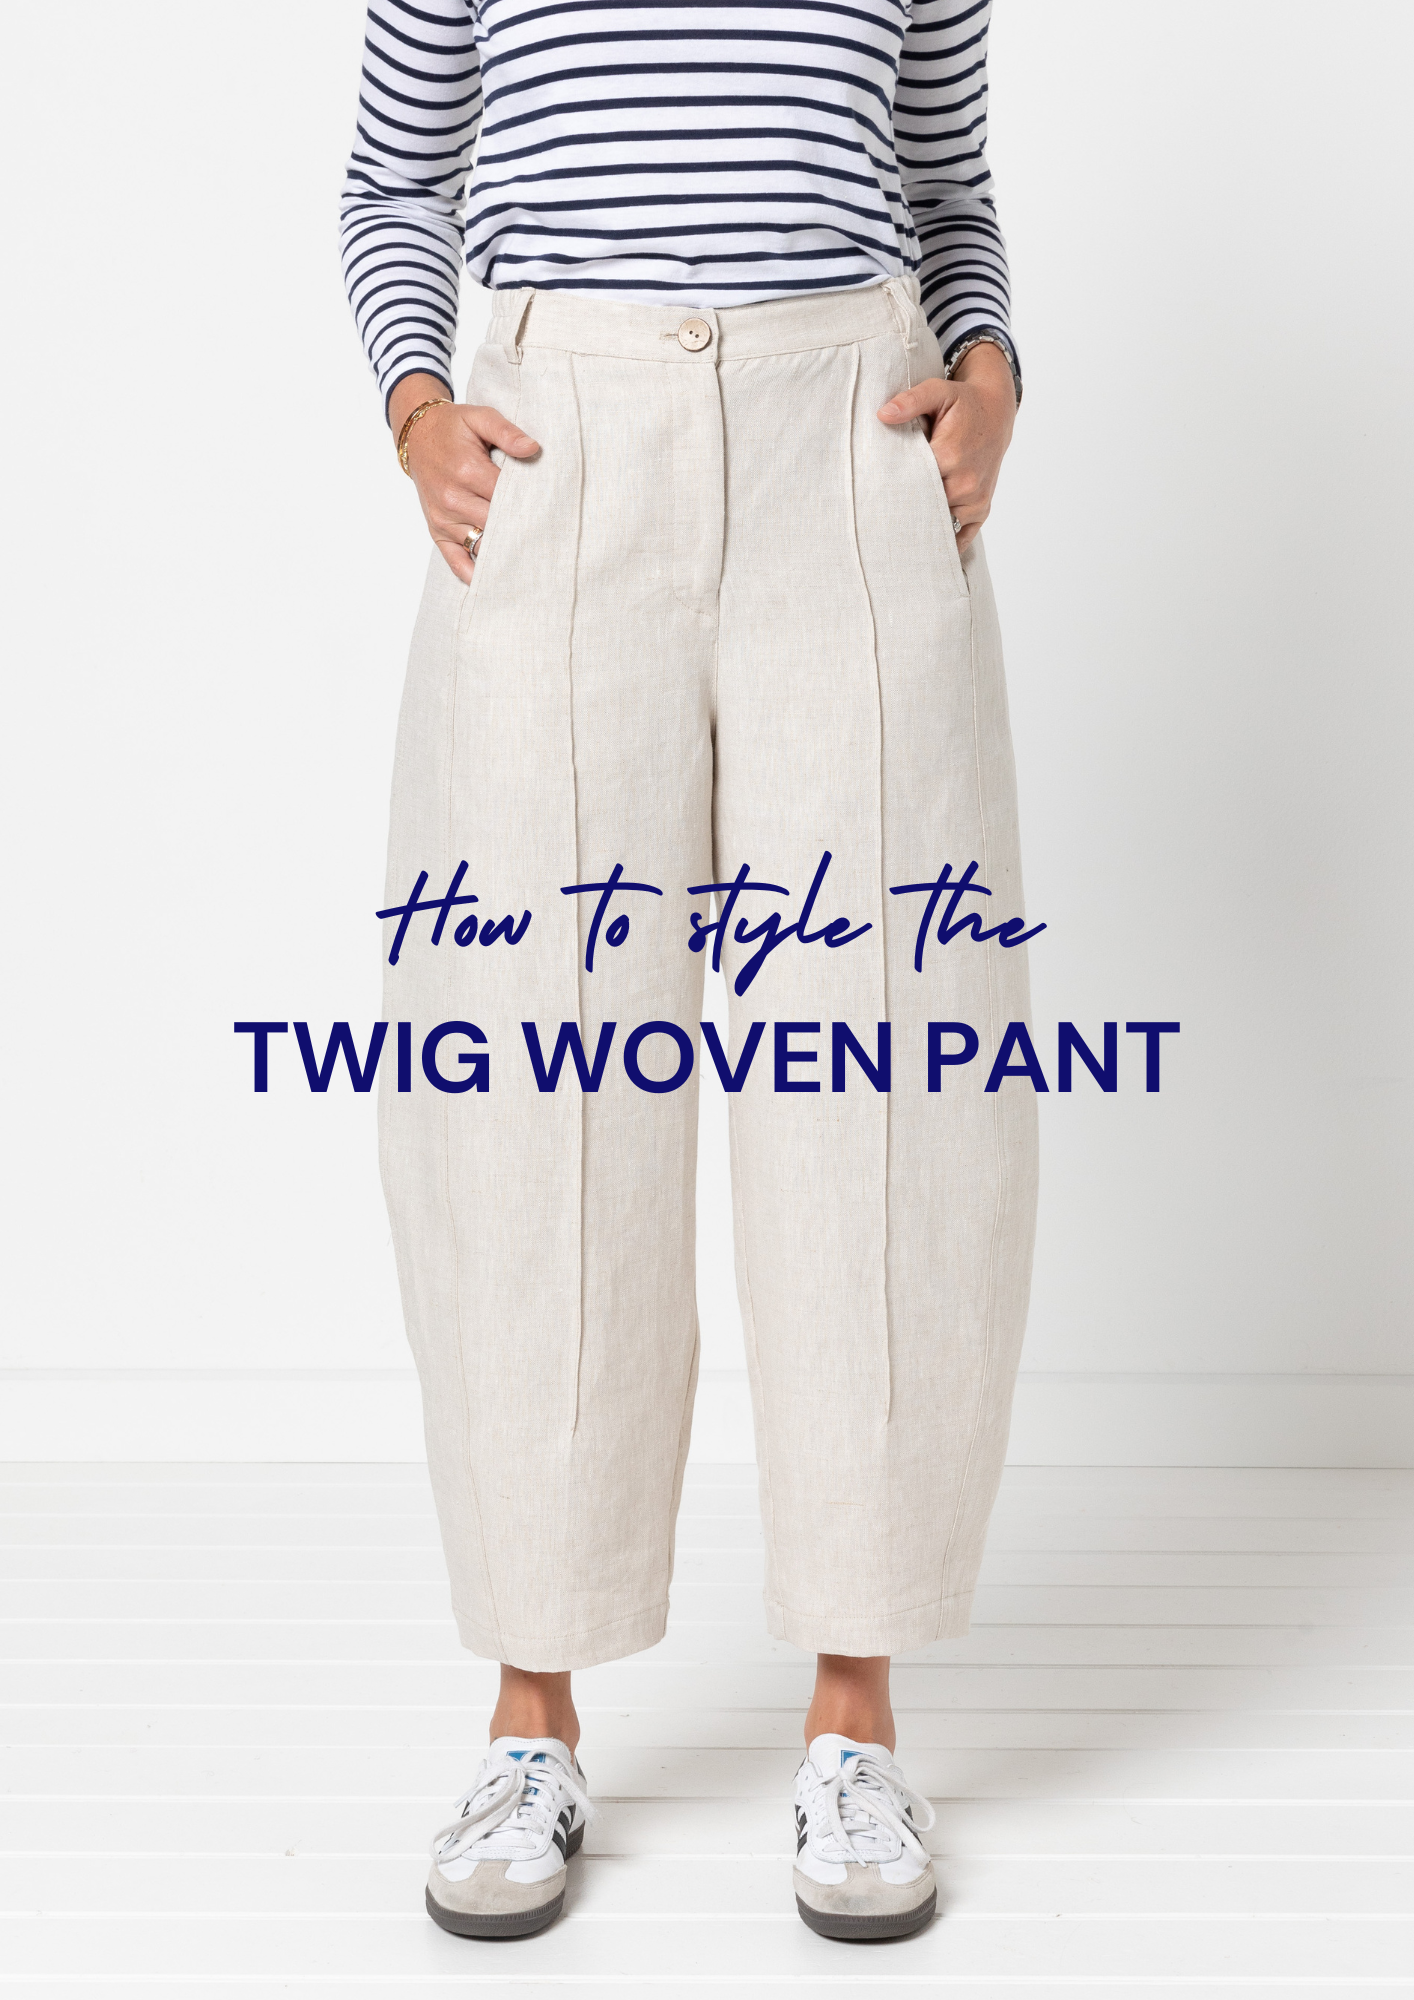 How to style the NEW Twig Woven Pant Pattern